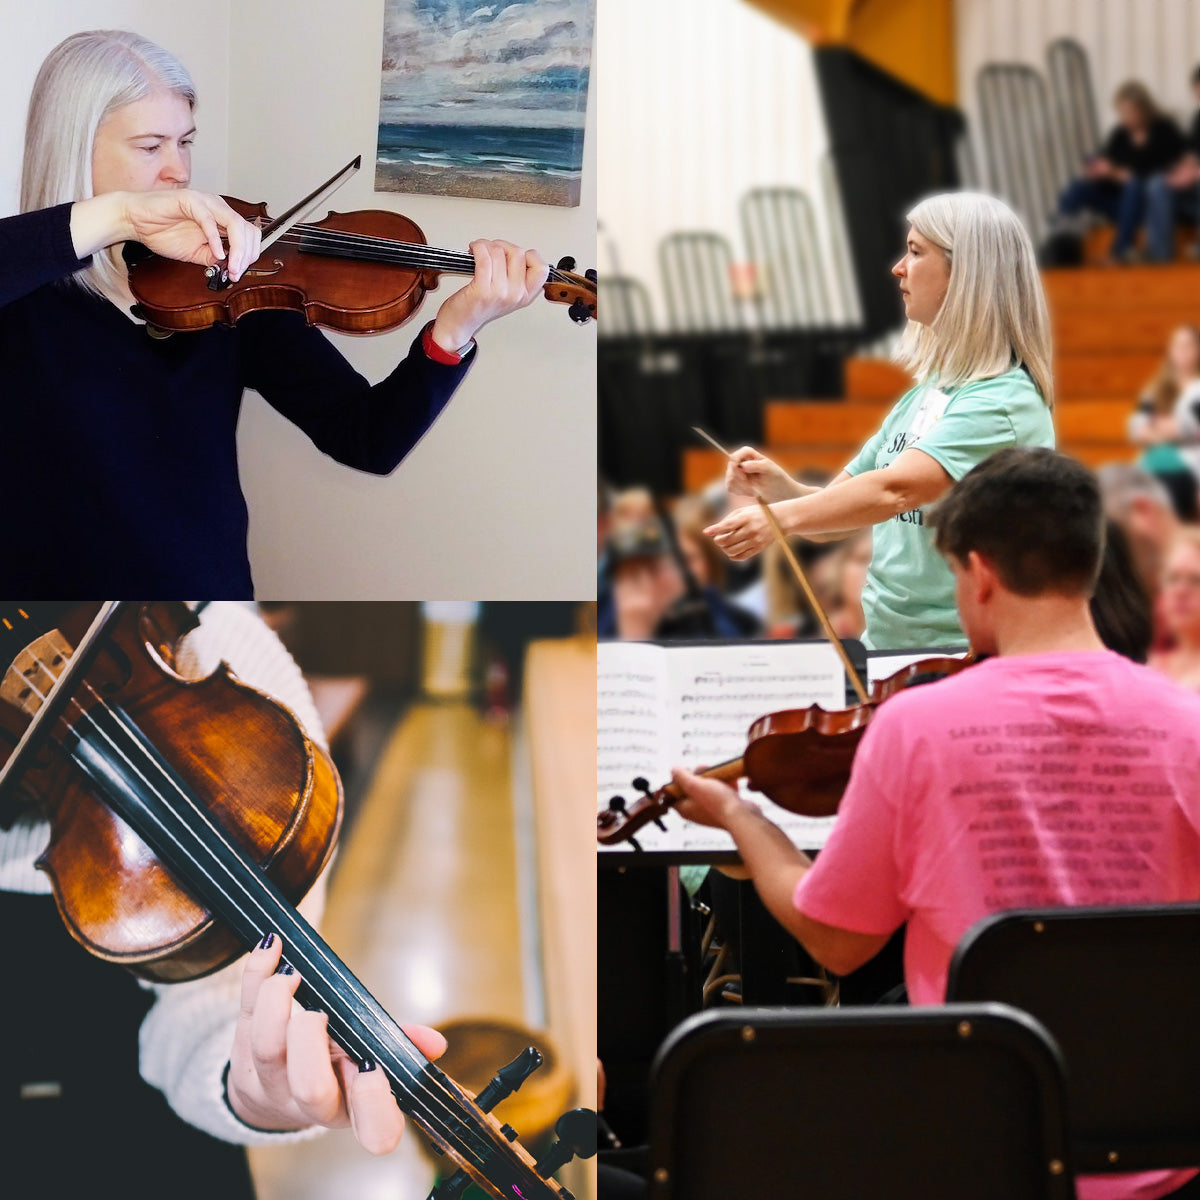 Collage of photos of Sarah Siegler, composer, string orchestra teacher, and owner of Grand Mesa Strings playing the violin and of conducting. Plus a close-up of a violin being played.